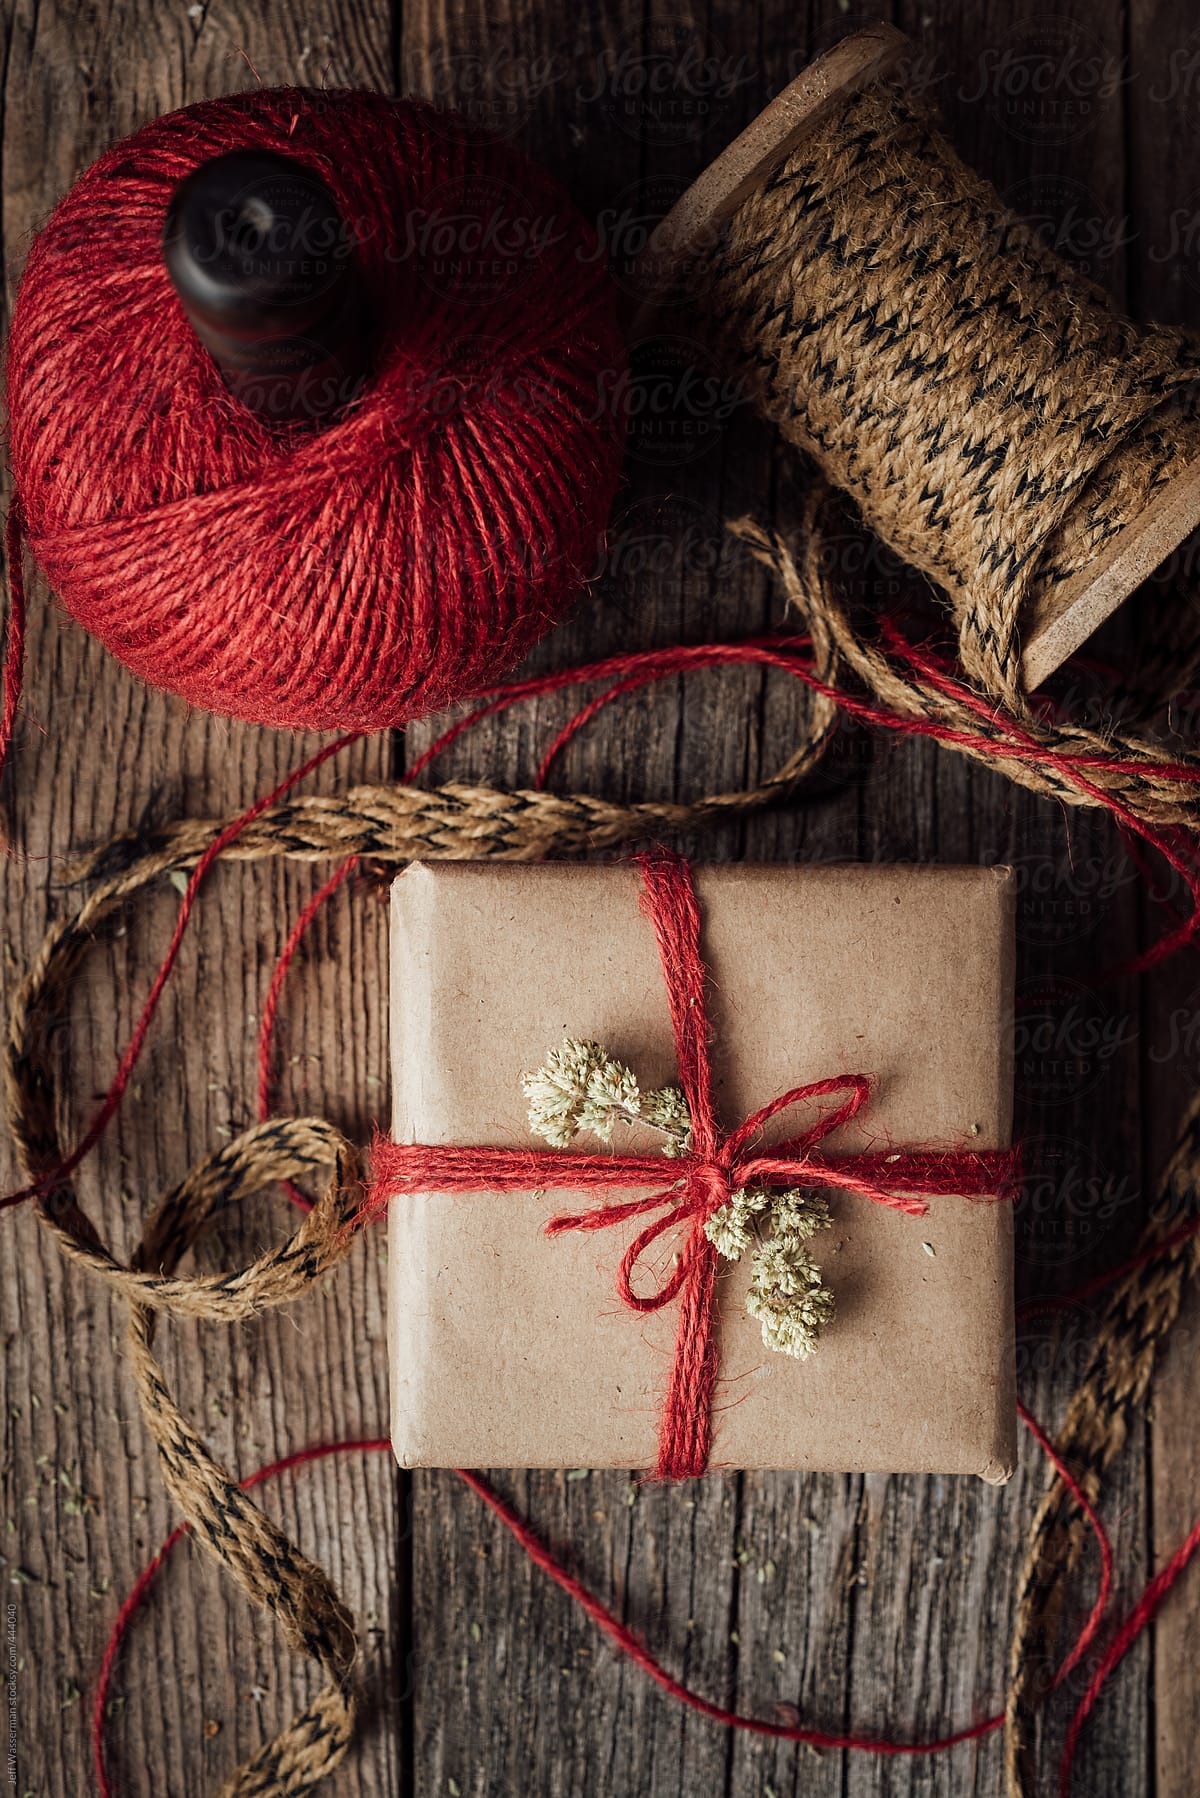 Rustic Christmas Gift Shown with Twine